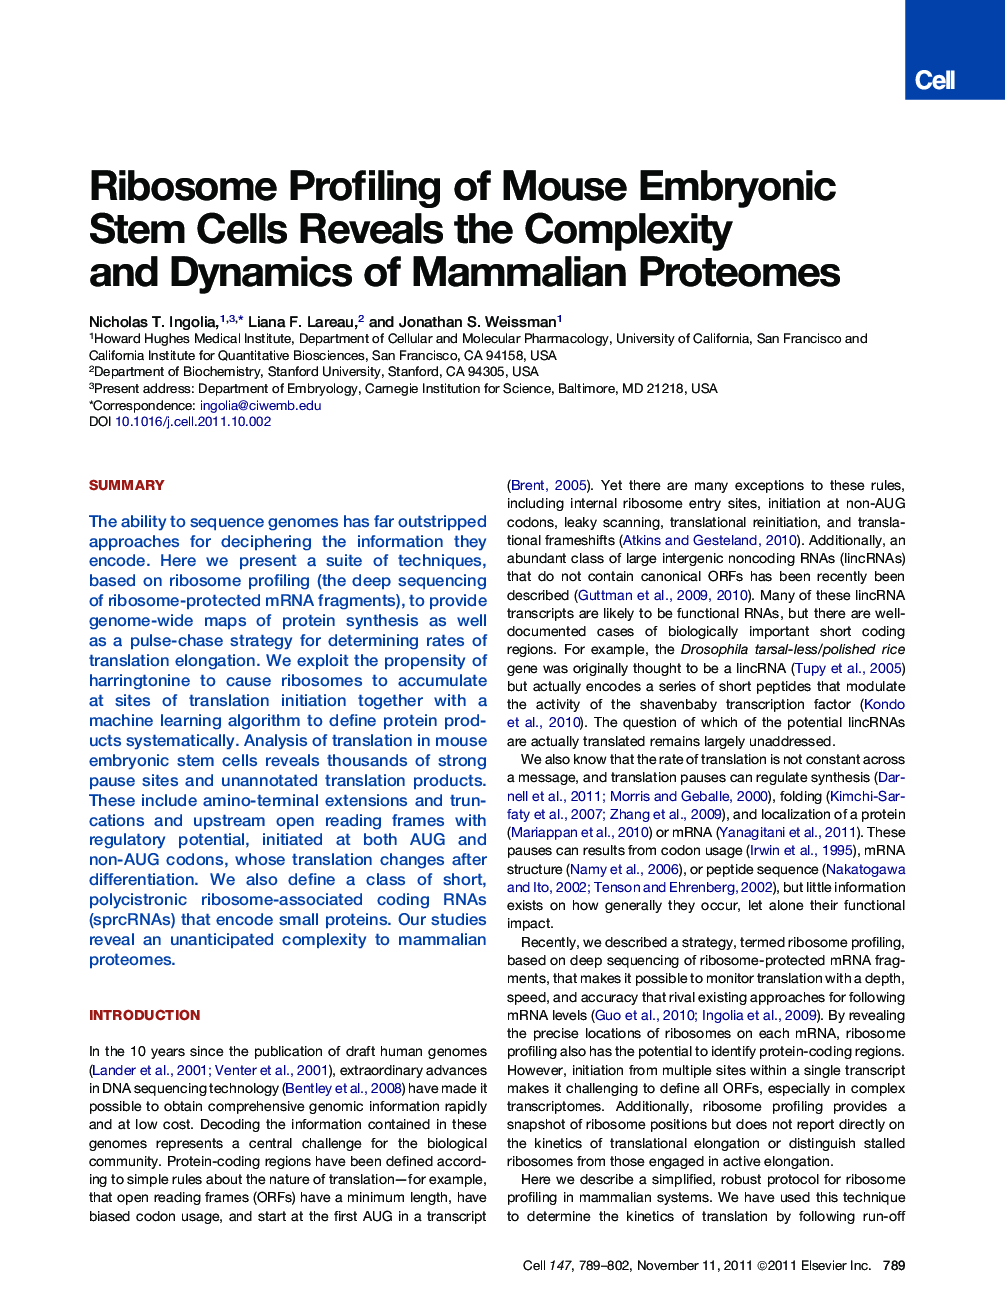 Ribosome Profiling of Mouse Embryonic Stem Cells Reveals the Complexity and Dynamics of Mammalian Proteomes